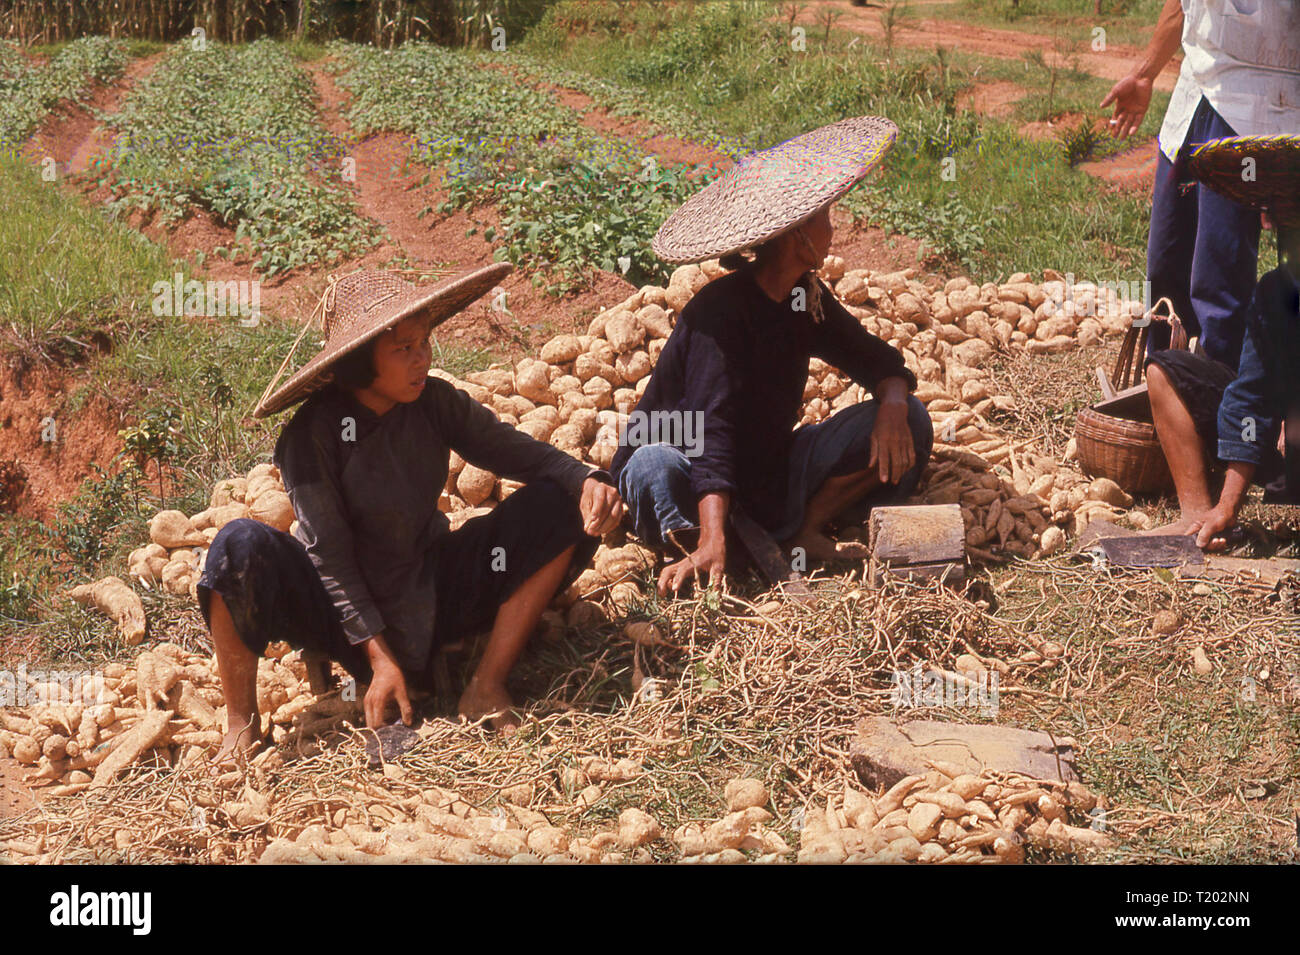 1960s, two chinese workers wearing straw coolie or bamboo hats sitting outside in a field sorting a crop of yams or sweet potatoes, a root vegetable which is a native crop to Asia. Stock Photo